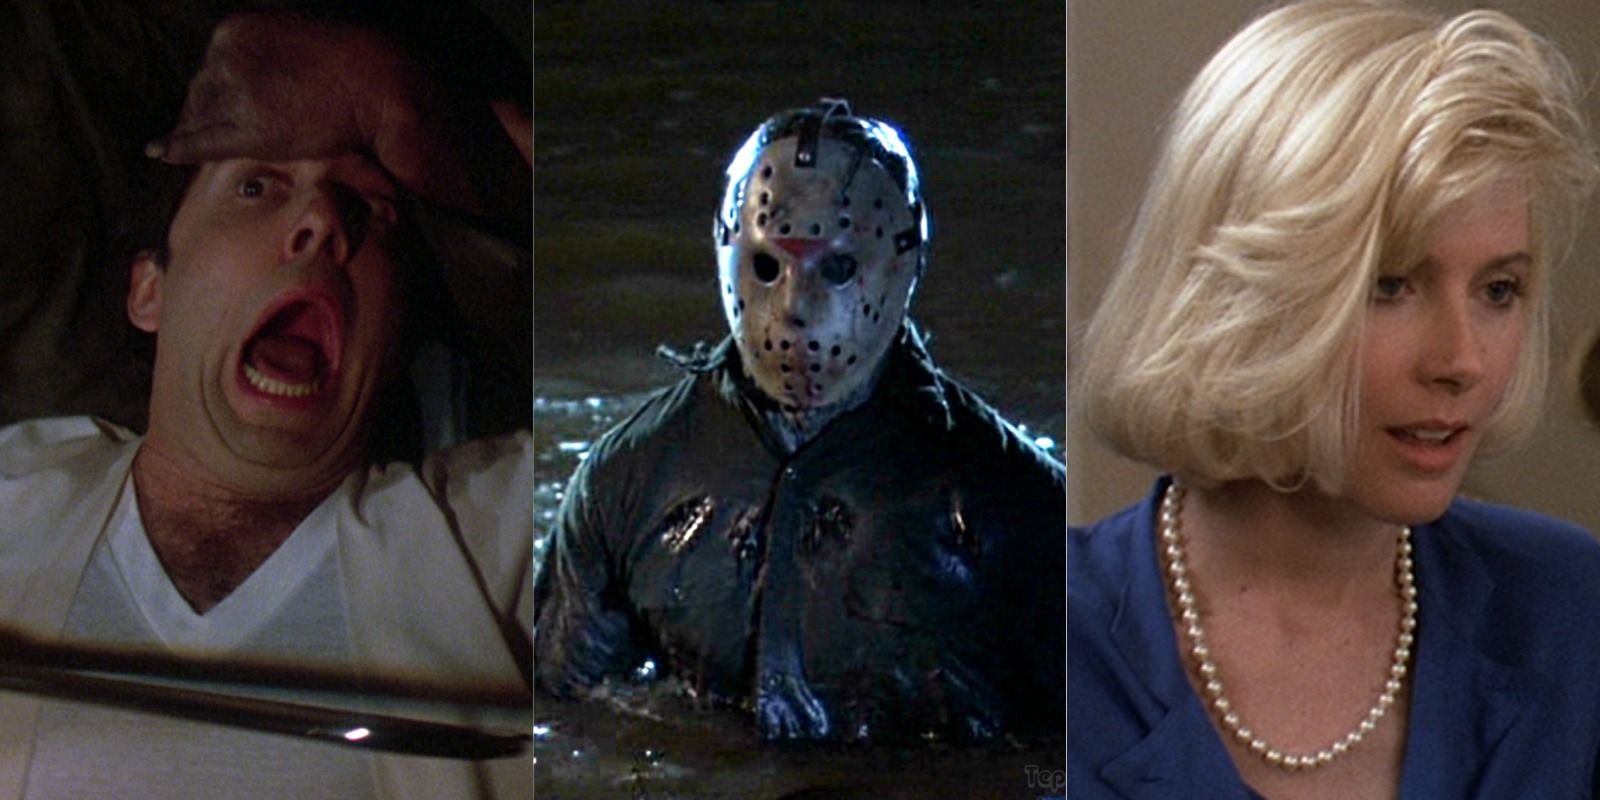 Friday The 13th 10 Characters That Deserved Their Fate